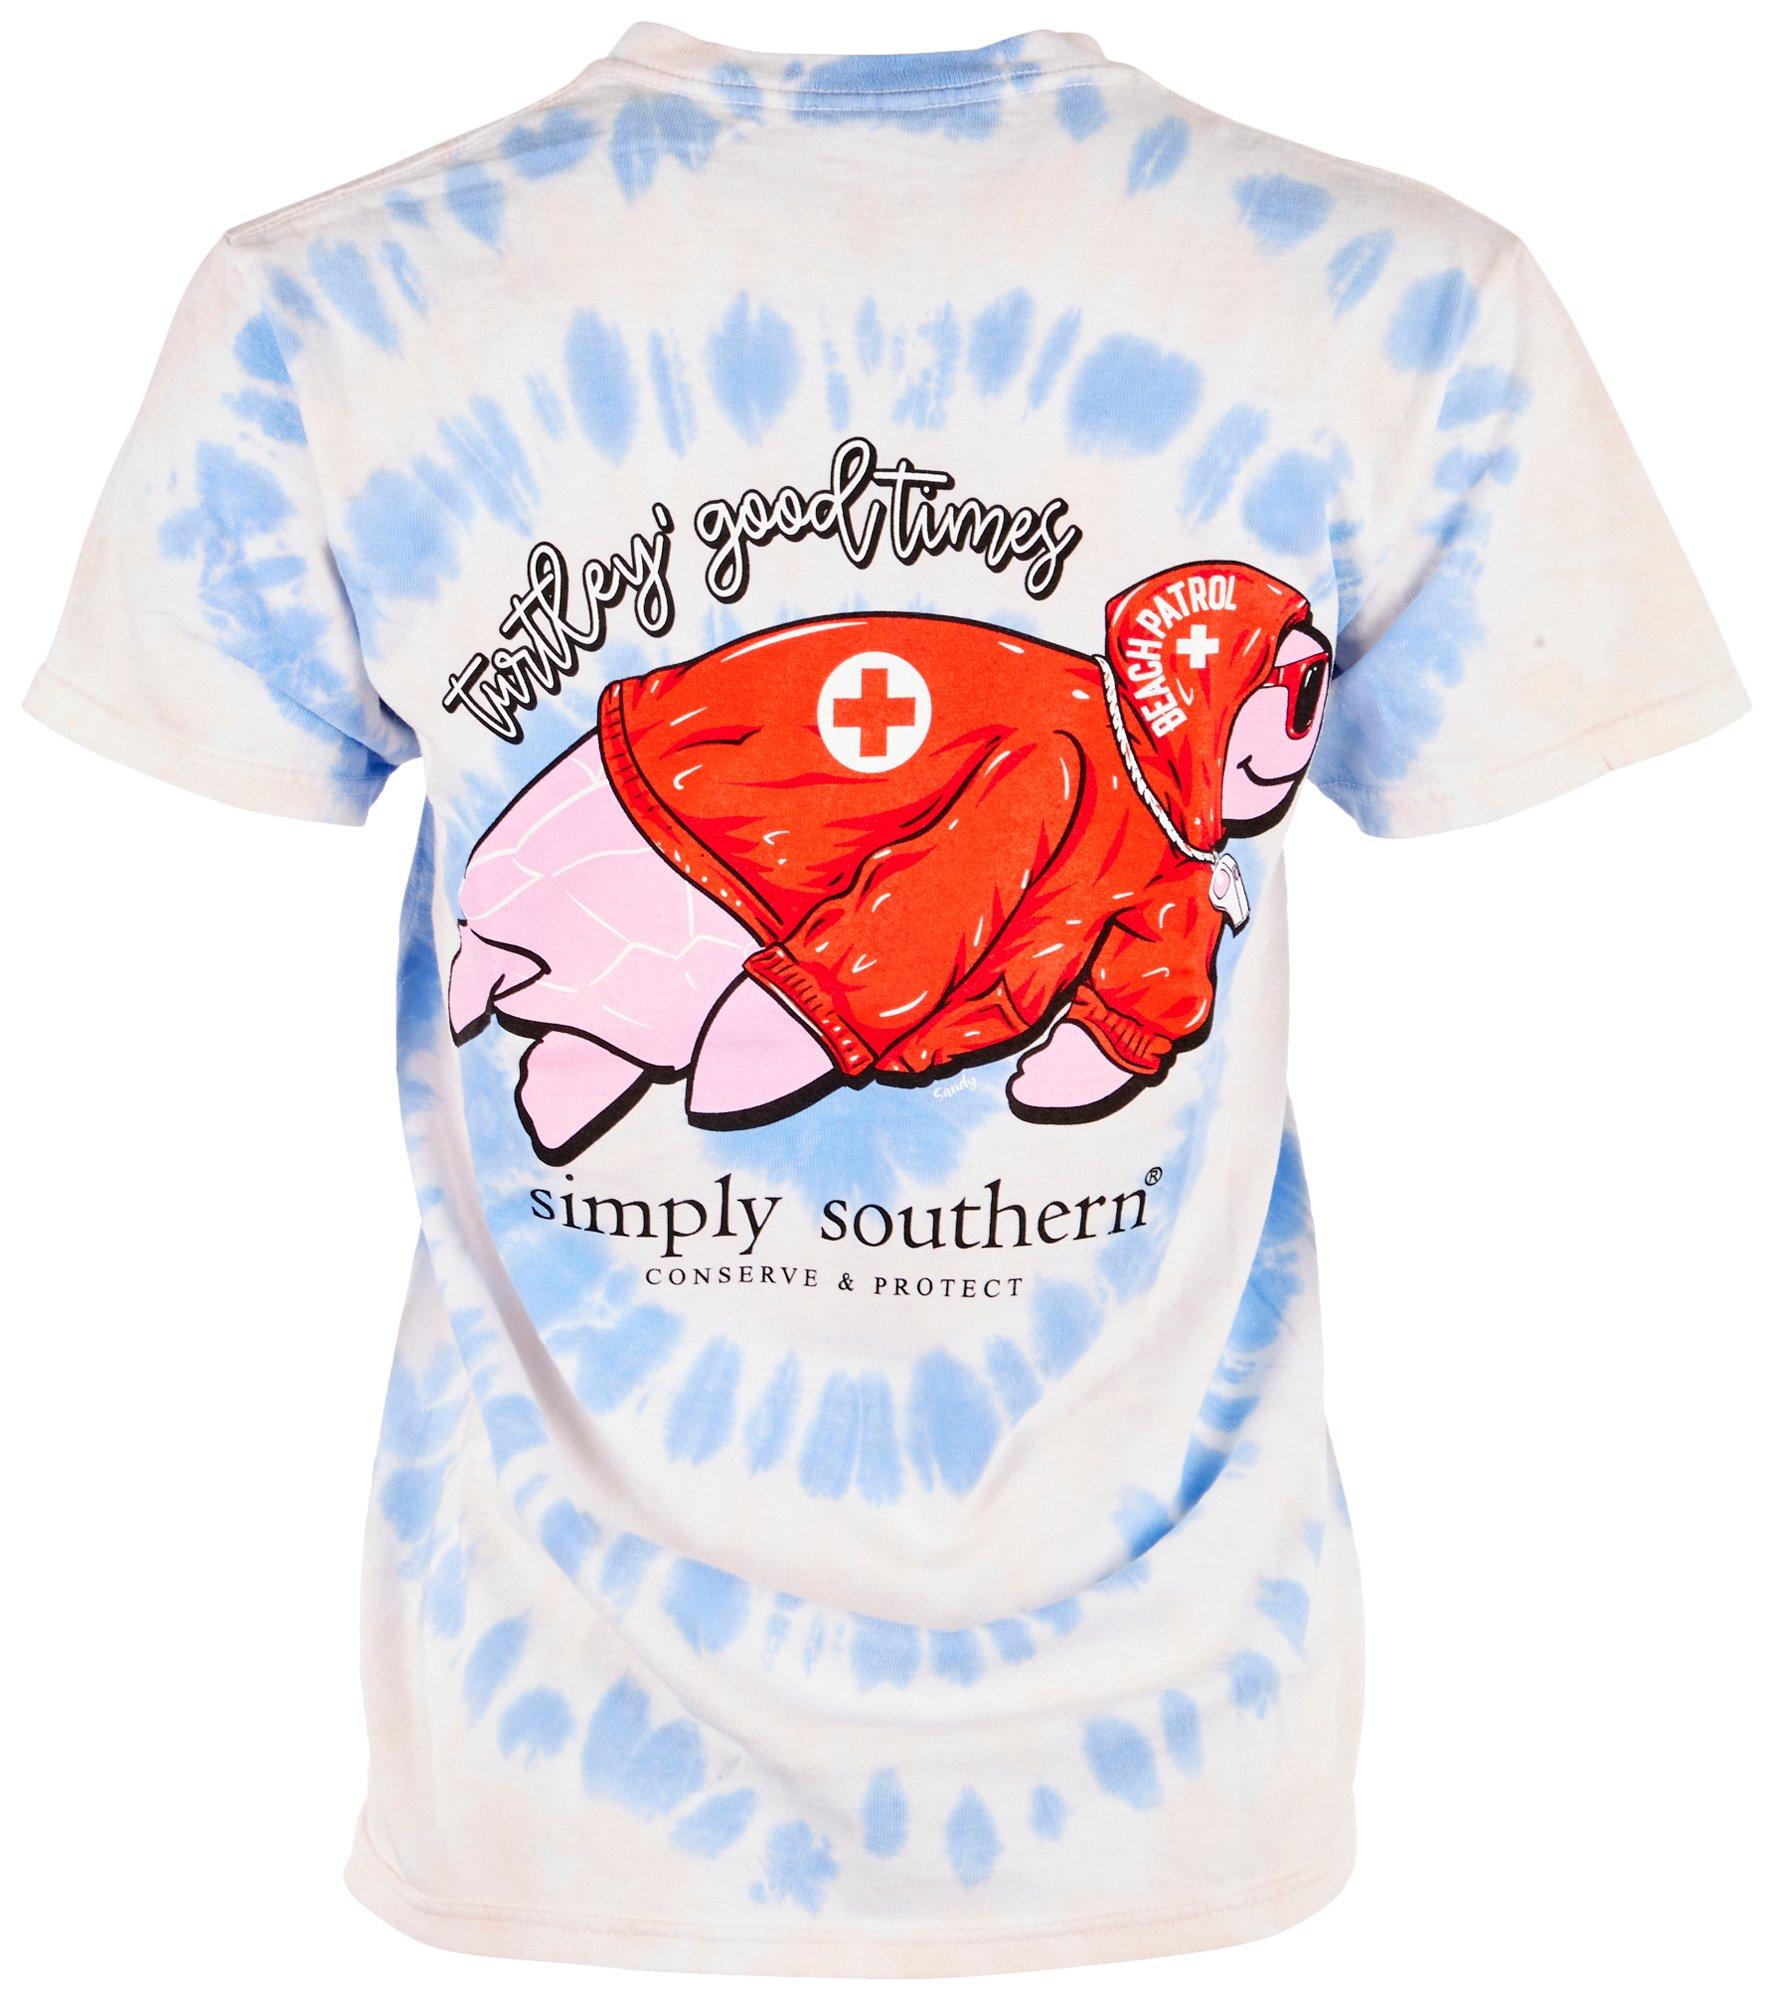 Simply Southern Juniors Sea Trutle Short Sleeve Top